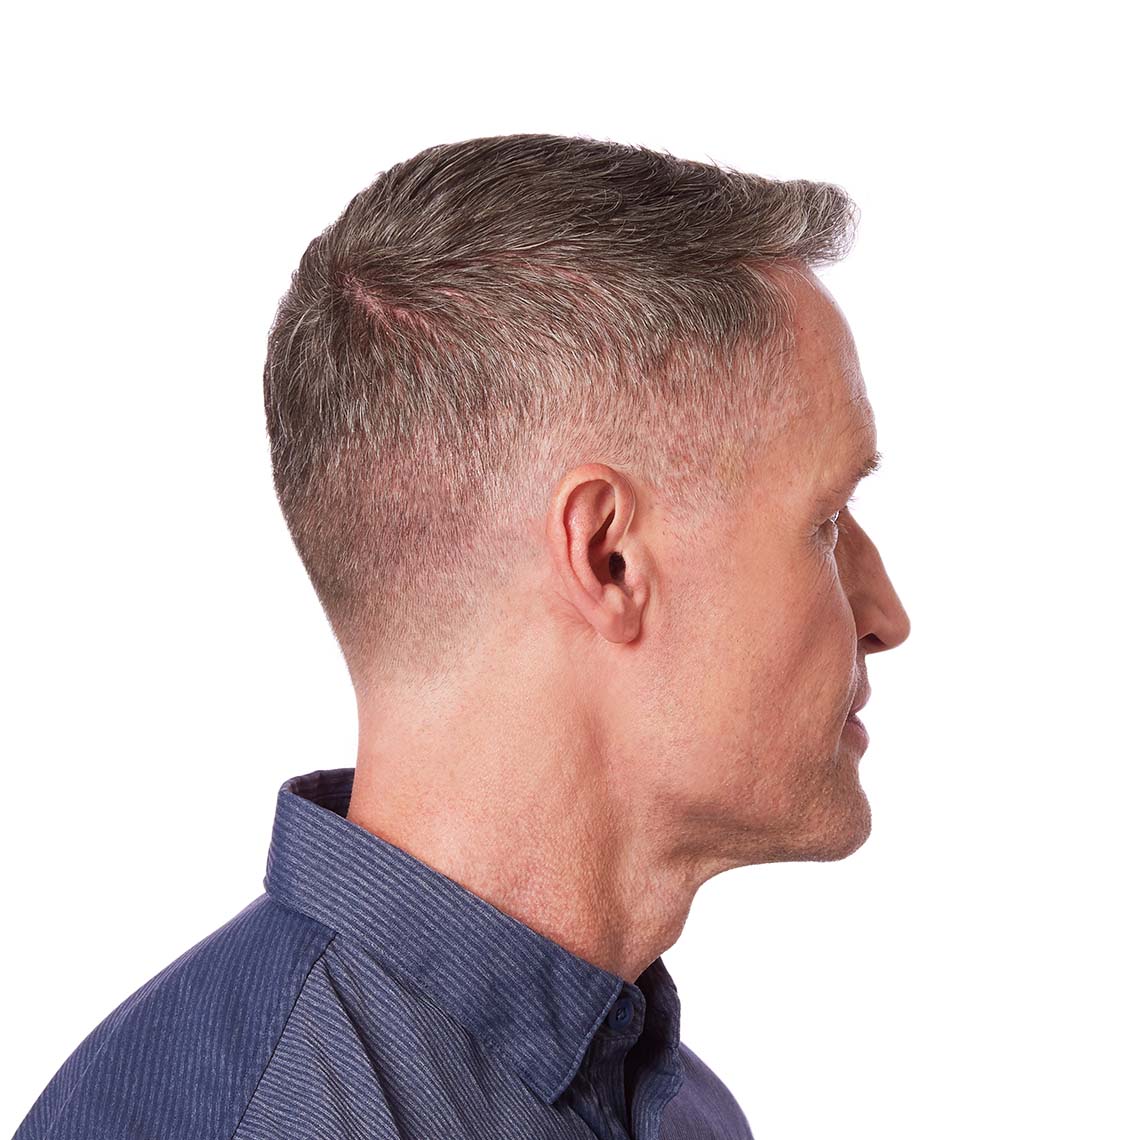 A Sterling micro RIC 312 on a man's ear